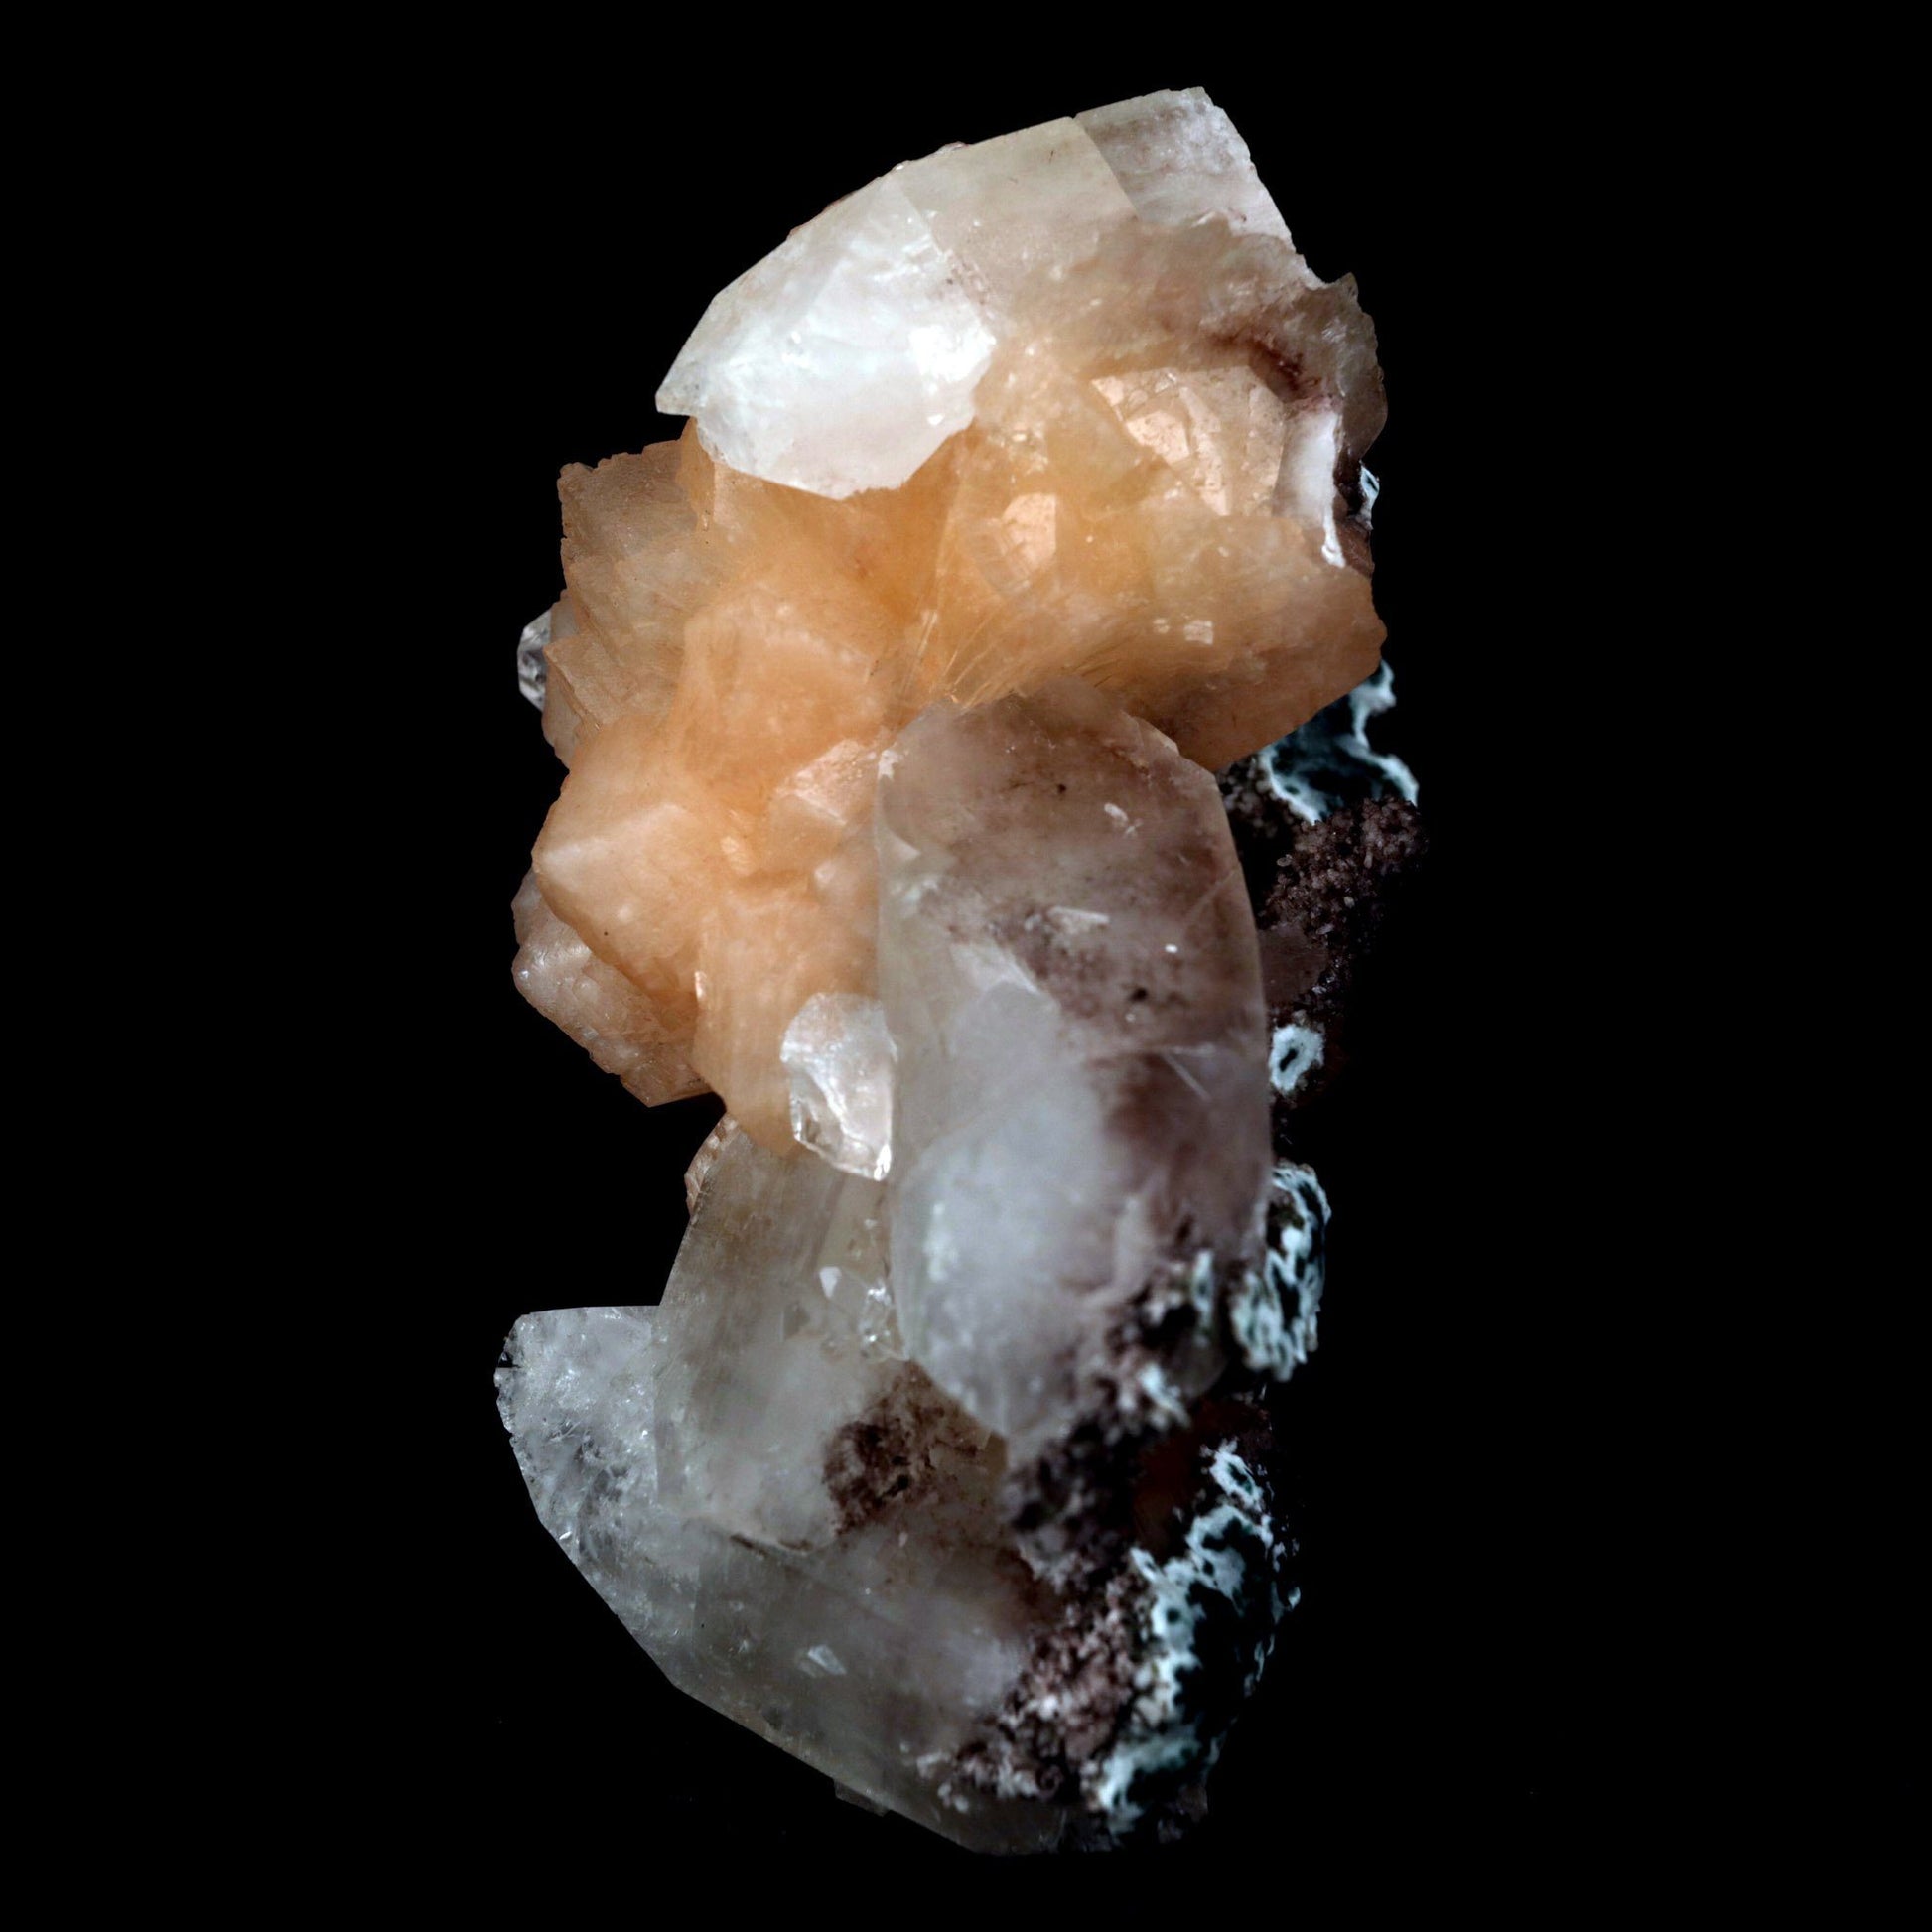 Stilbite with Apophyllite on Chalcedony Natural Mineral Specimen # B …  https://www.superbminerals.us/products/stilbite-with-apophyllite-natural-mineral-specimen-b-4799  Features: An impressive doubly terminated, lustrous salmon-pink bladed stilbite bowtie, nicely accented with side car crystals, is dramatically set on the thin basalt crust on this beautifully sculptural small cabinet from recent finds in Jalgaon. The secondary doubly terminated stilbite. Small stilbite and smaller